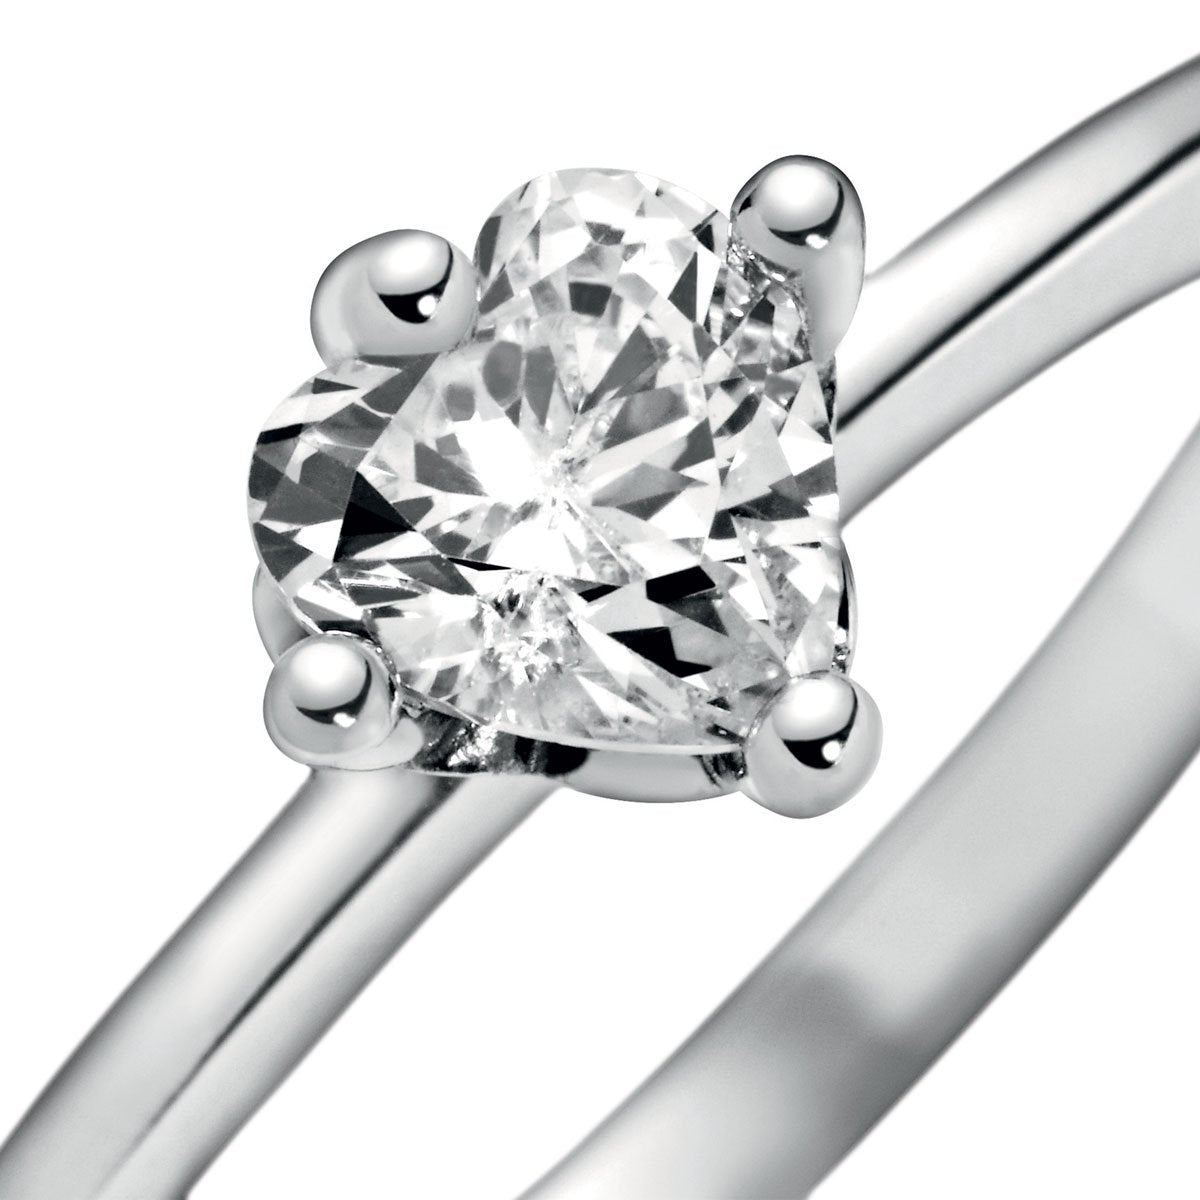 Pandora Clear Heart Solitaire Ring